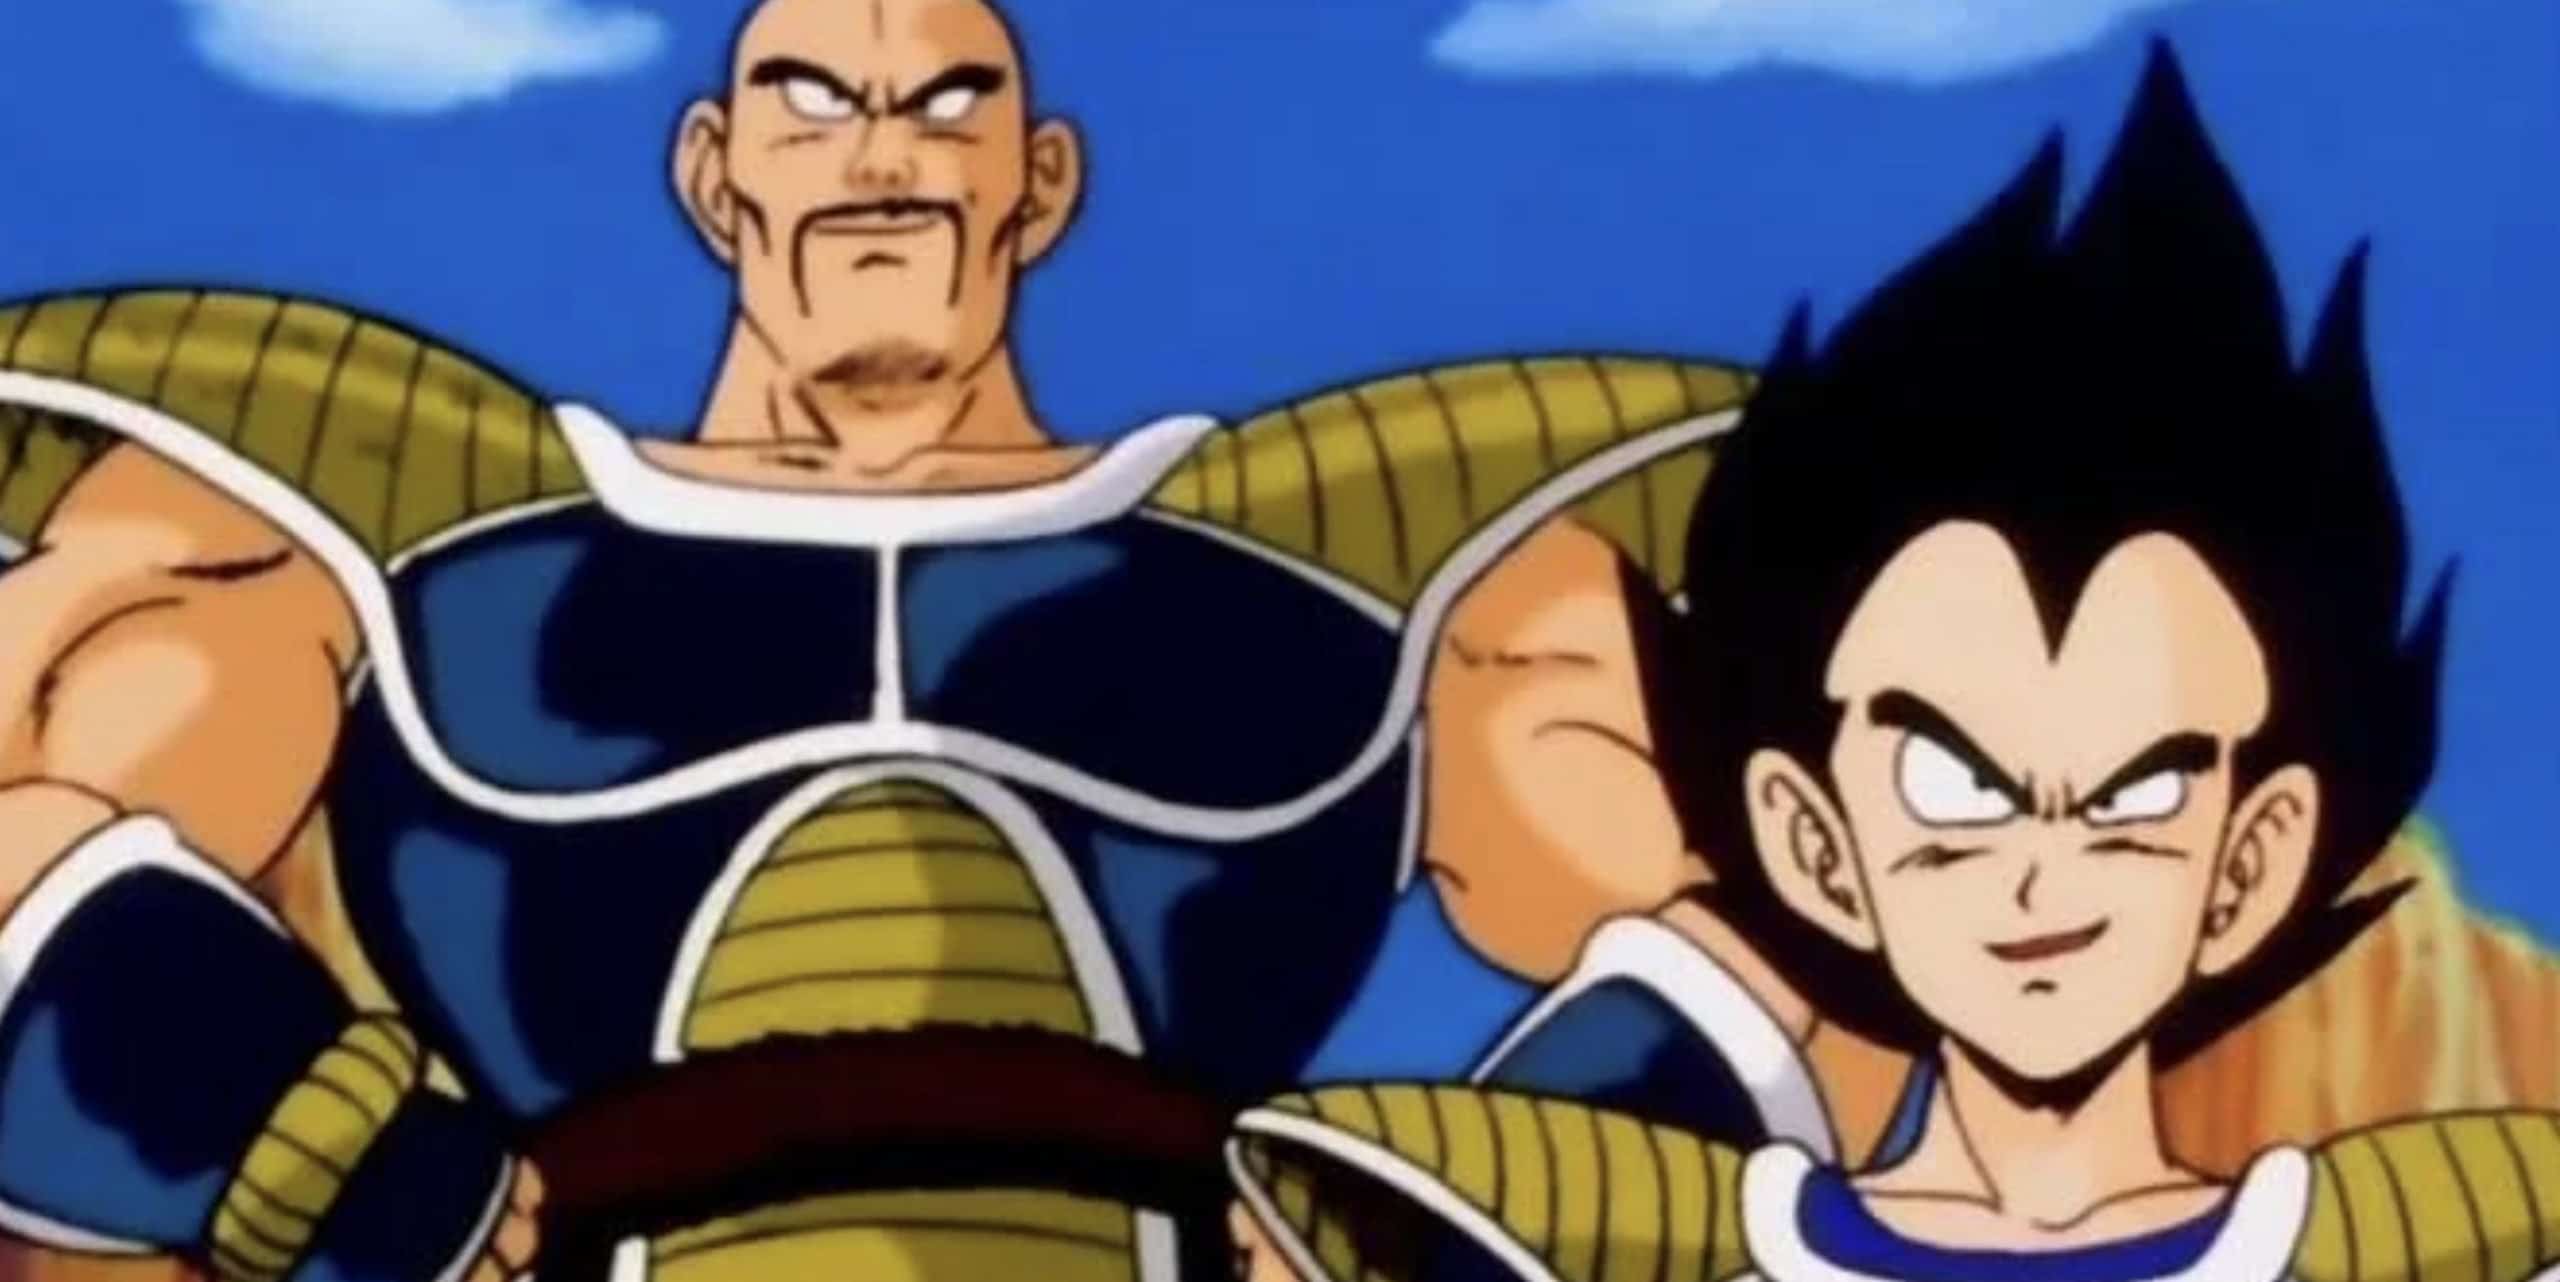 How Old Was Gohan When He Fought Cell In Dragon Ball Series?